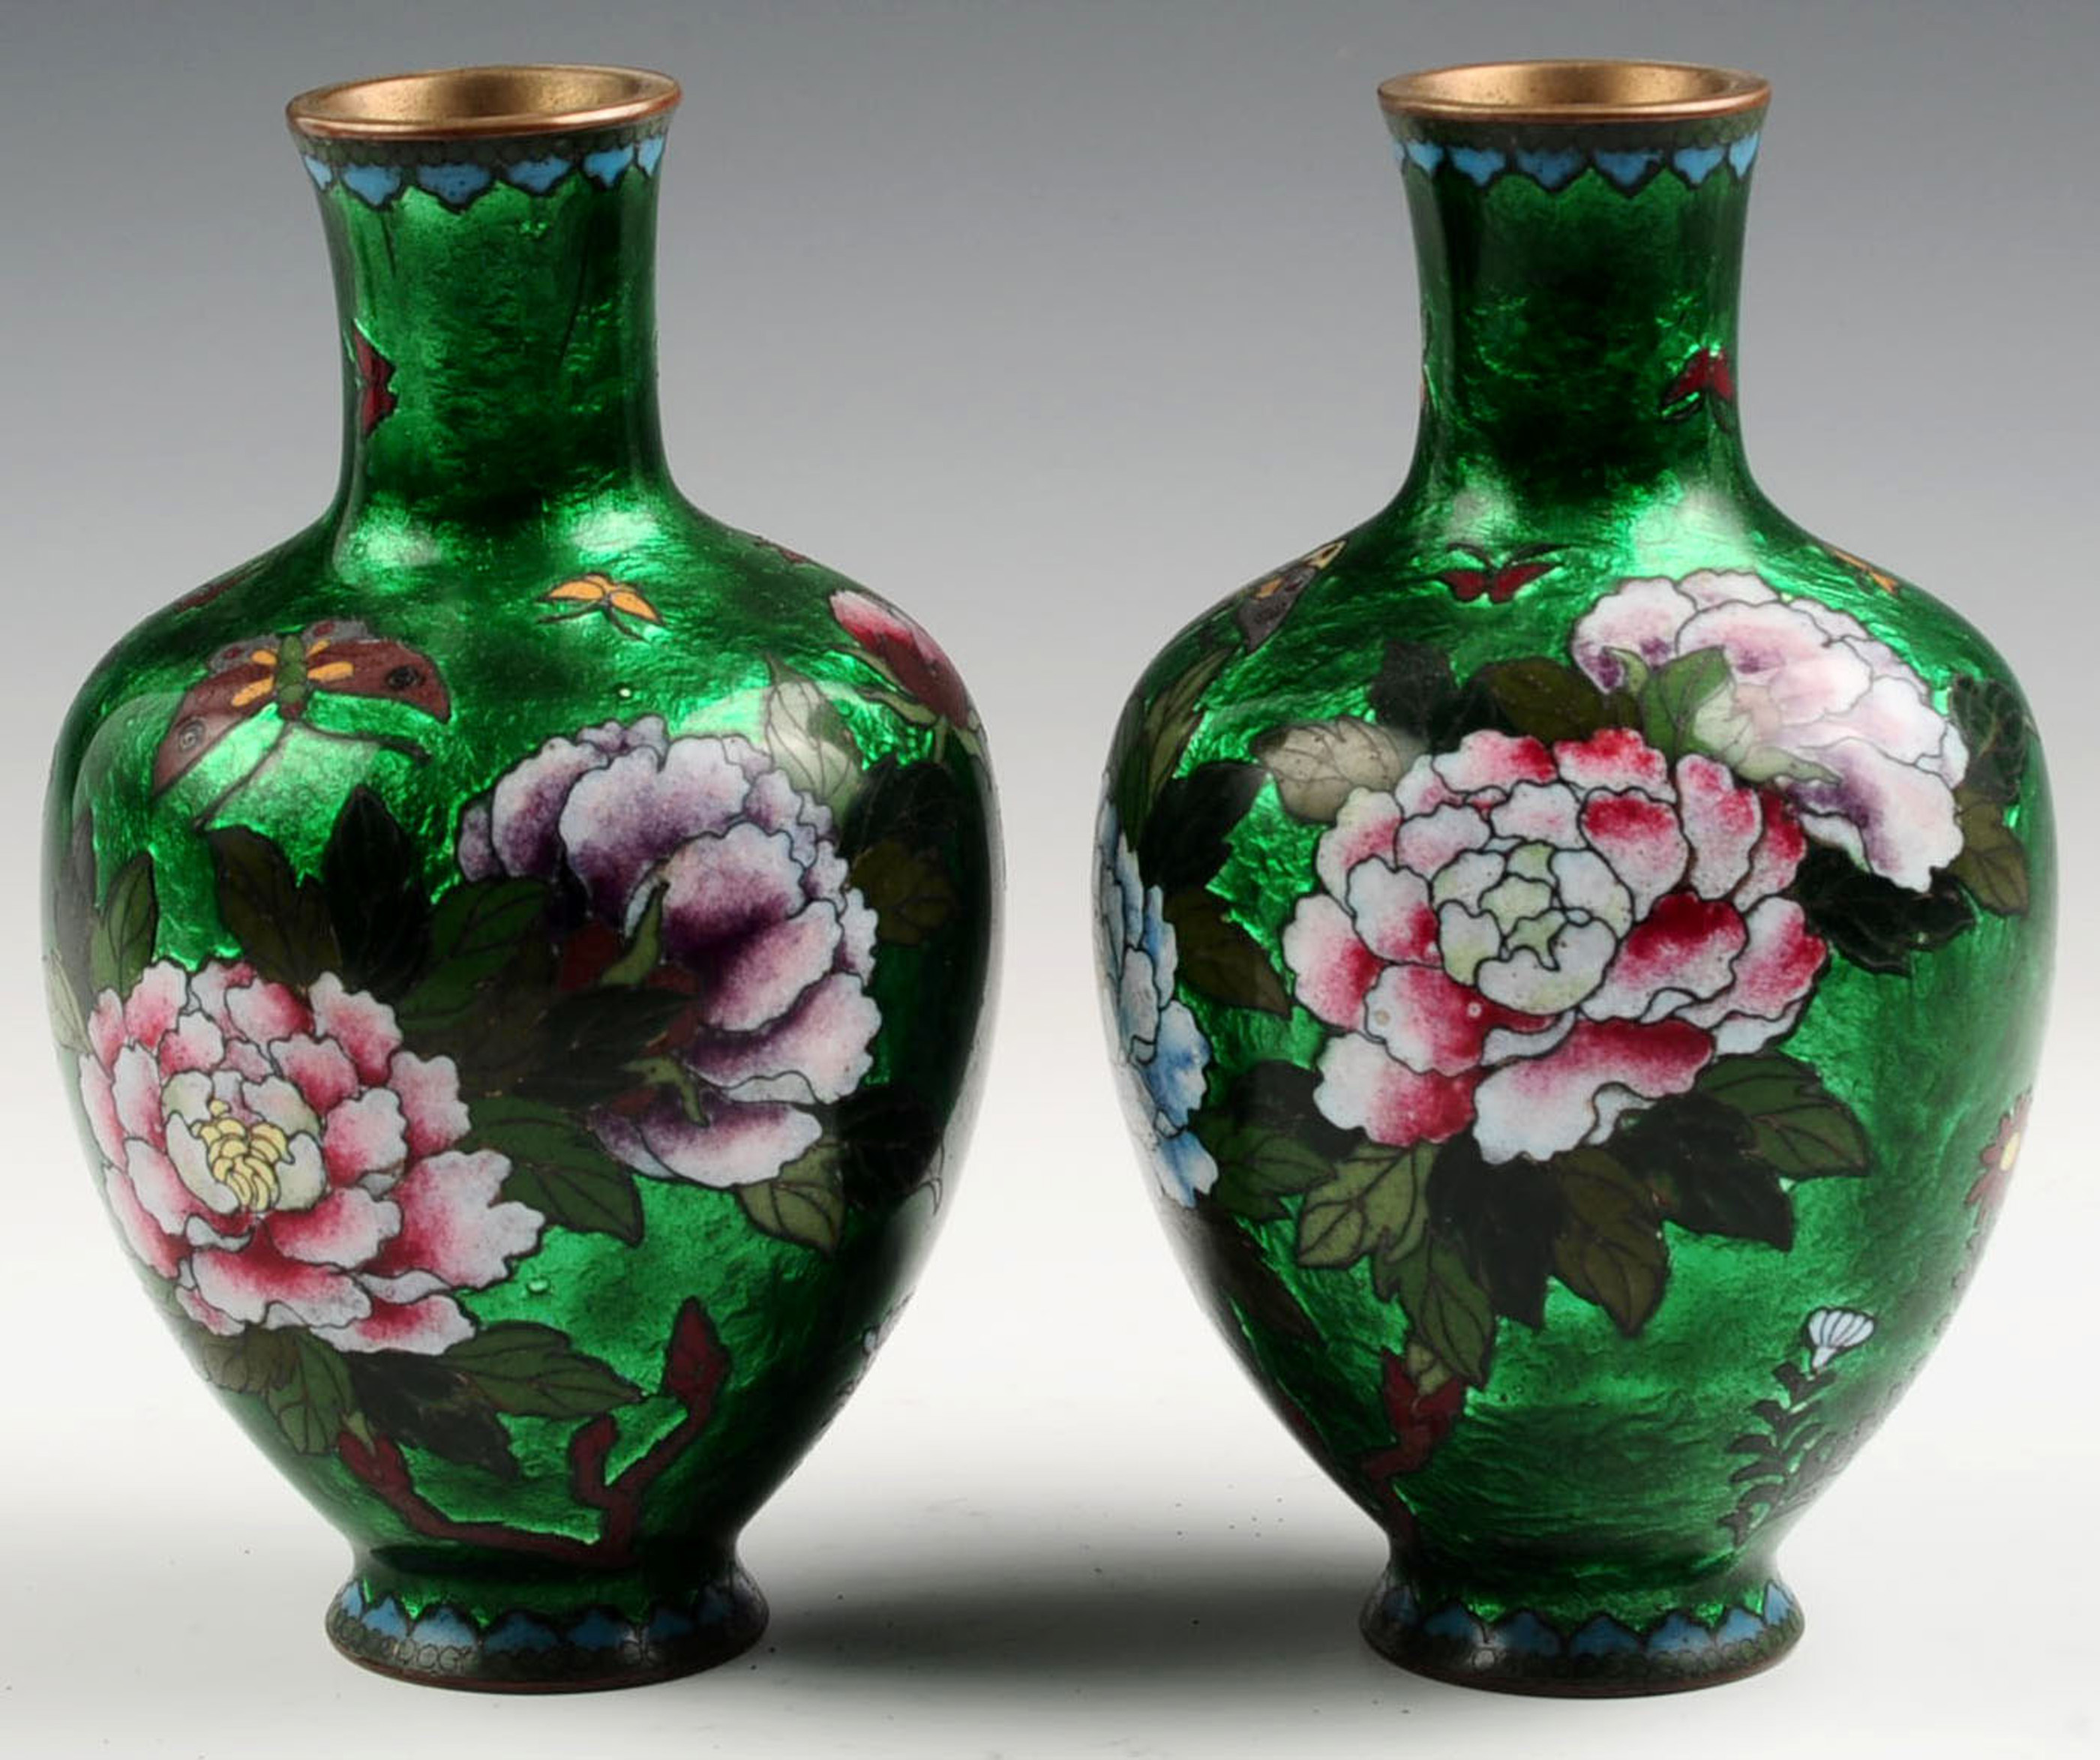 A PAIR OF CHINESE EMERALD GREEN CLOISONNE VASES